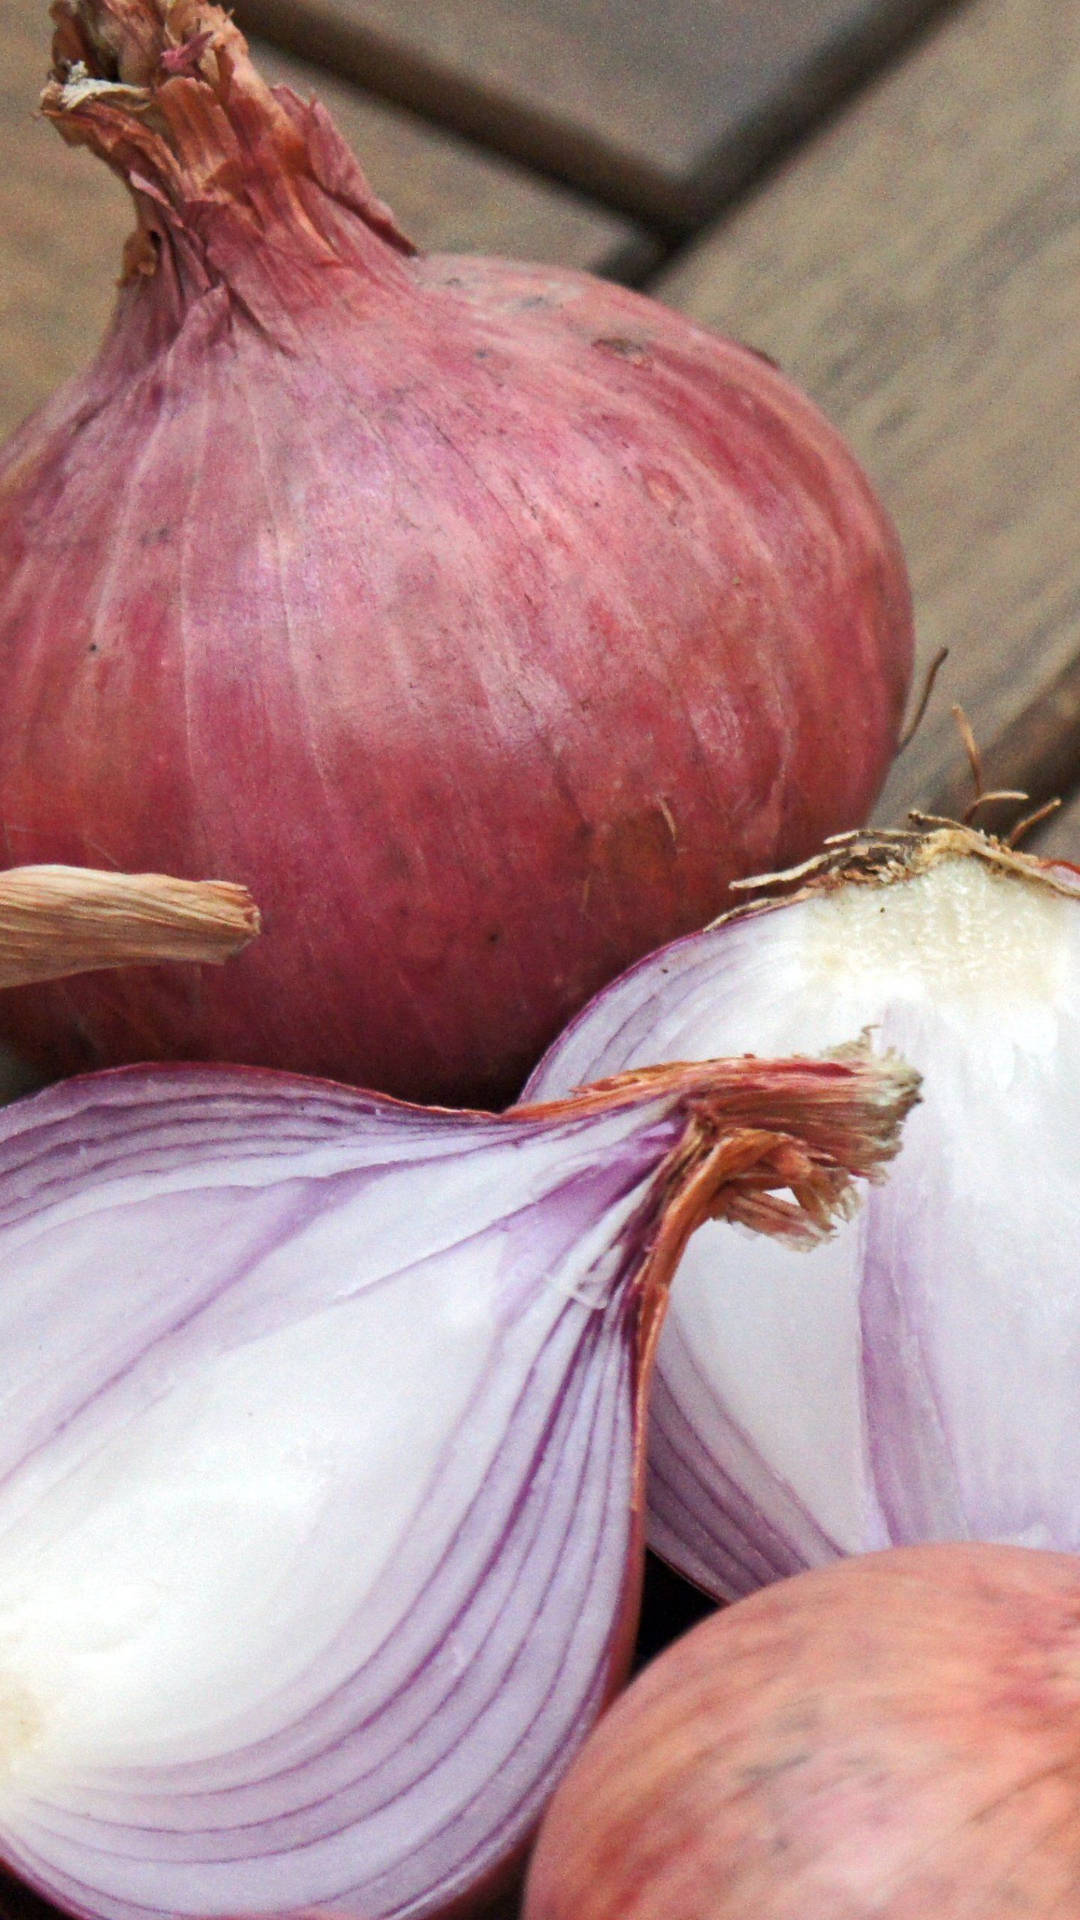 Pale Red Onions On Wooden Planks Wallpaper